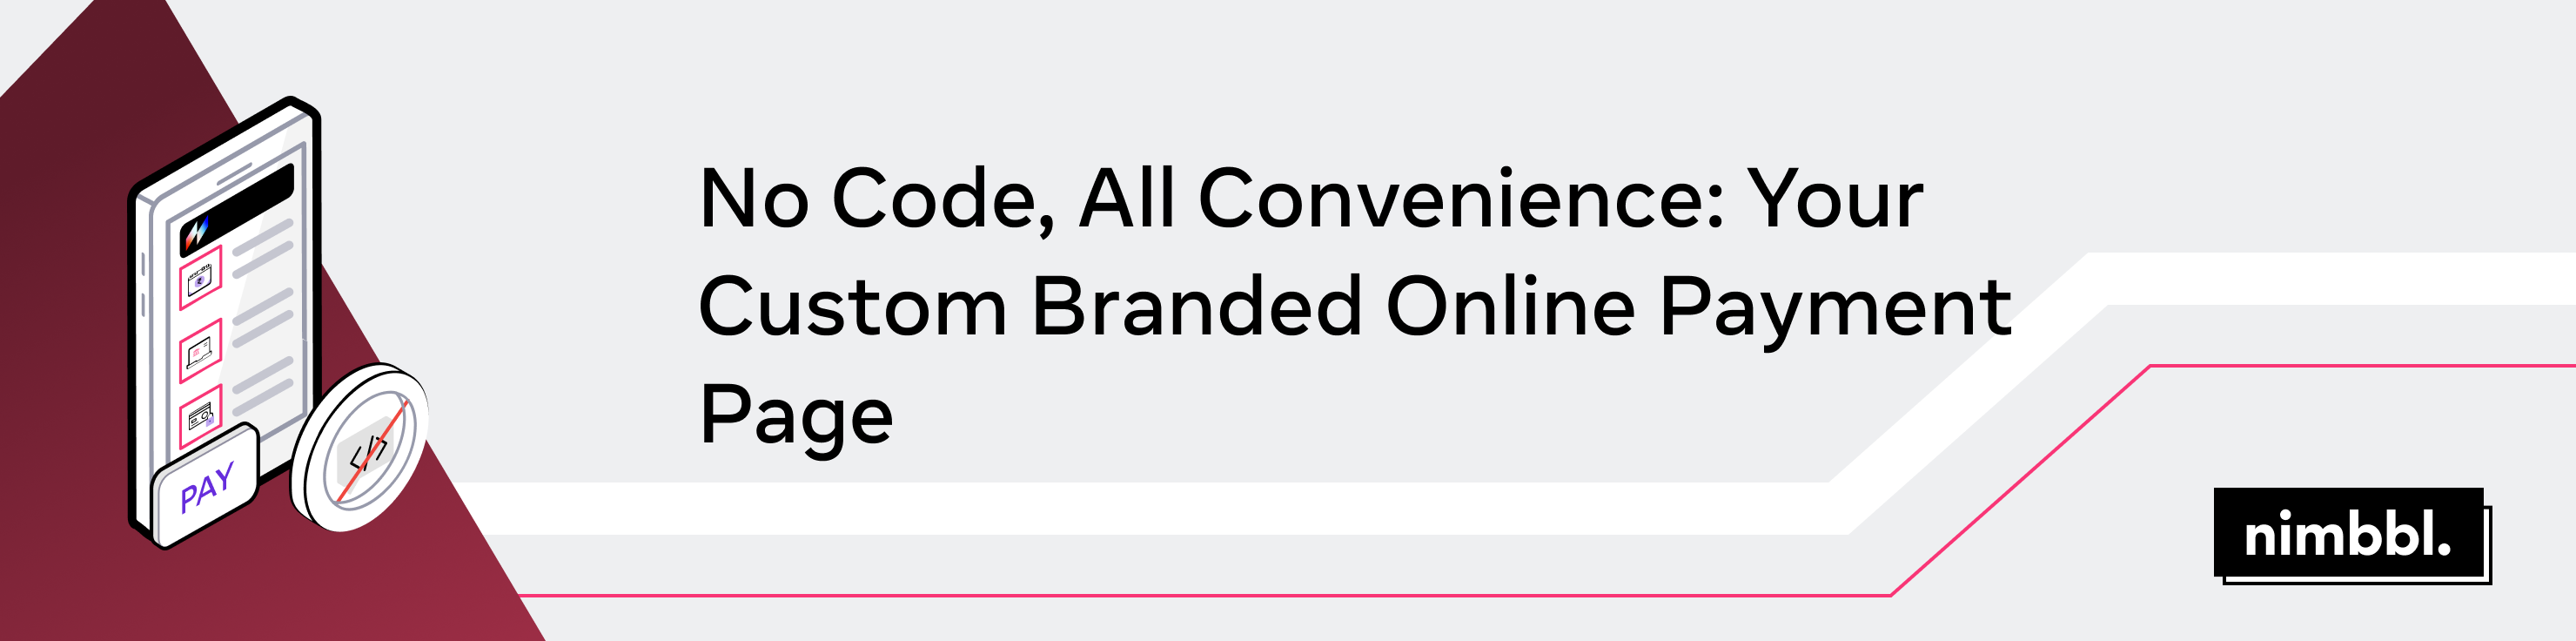 No Code, All Convenience: Your Custom Branded Online Payment Page